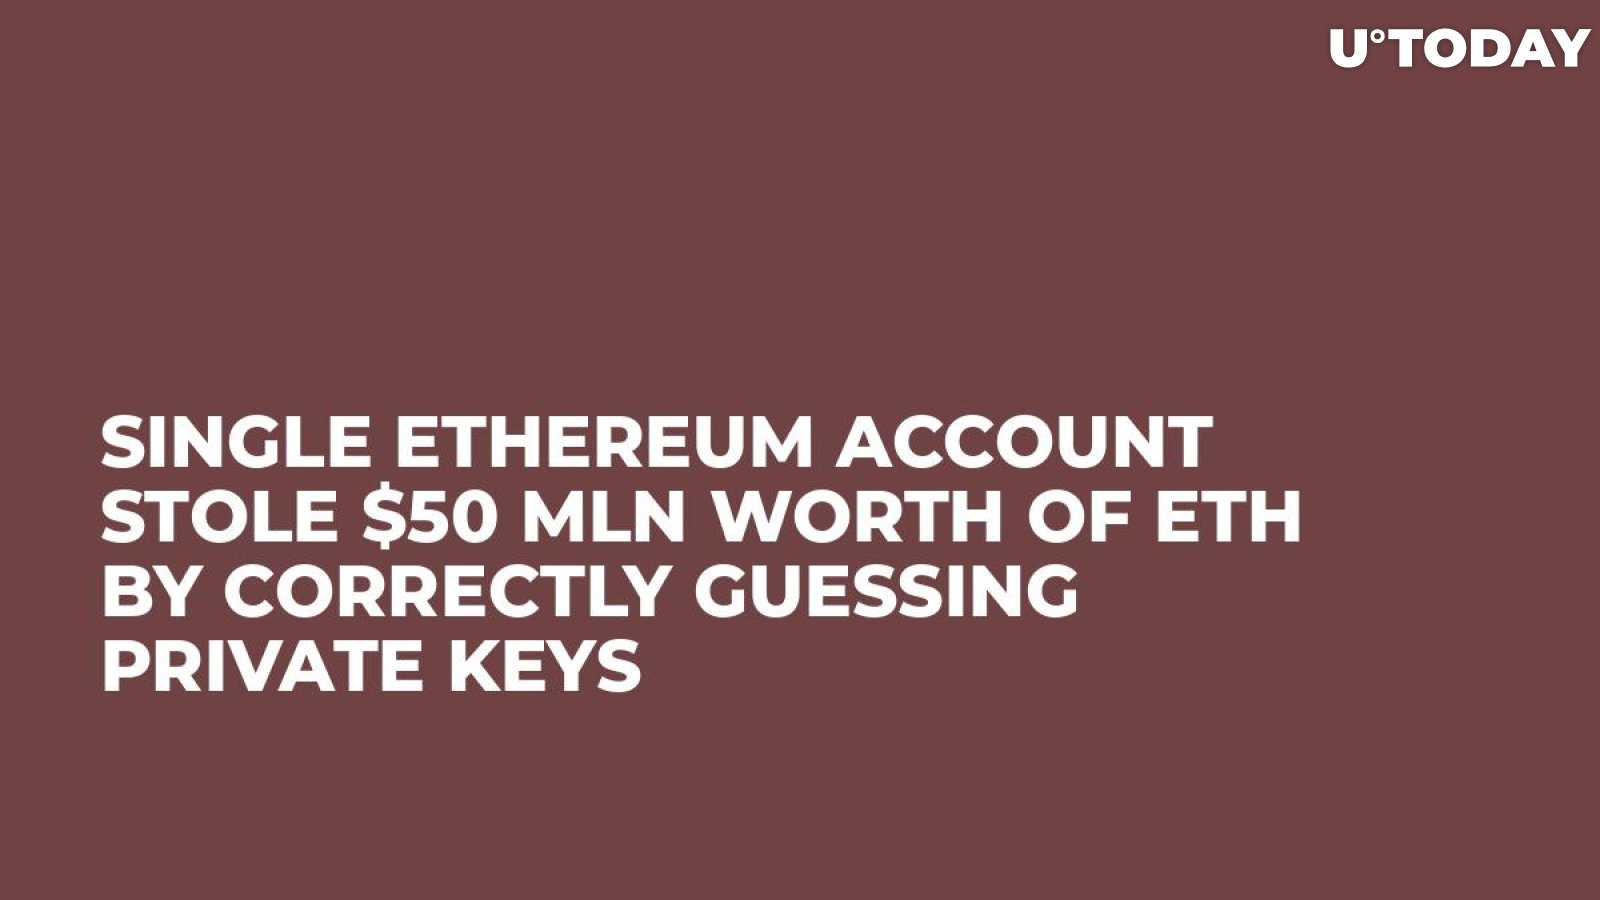 Single Ethereum Account Stole $50 Mln Worth of ETH by Correctly Guessing Private Keys 